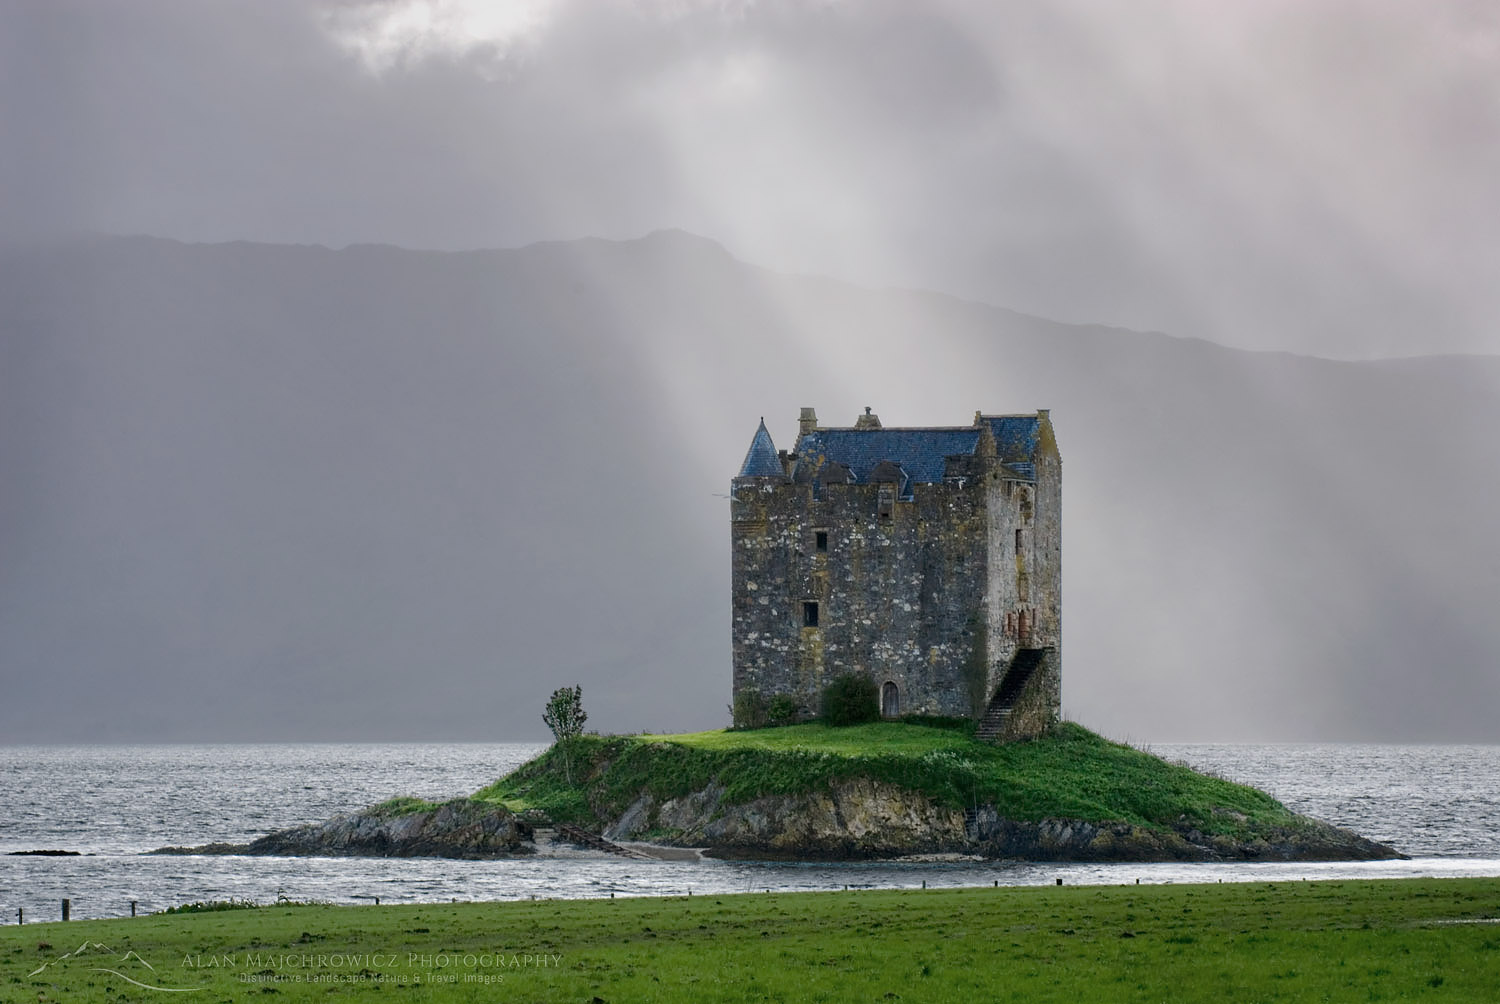 Castle Stalker Port Appin Scotland. This Castle was made famous by appearing in the closing scenes of Monty Python and the Holy Grail #11210